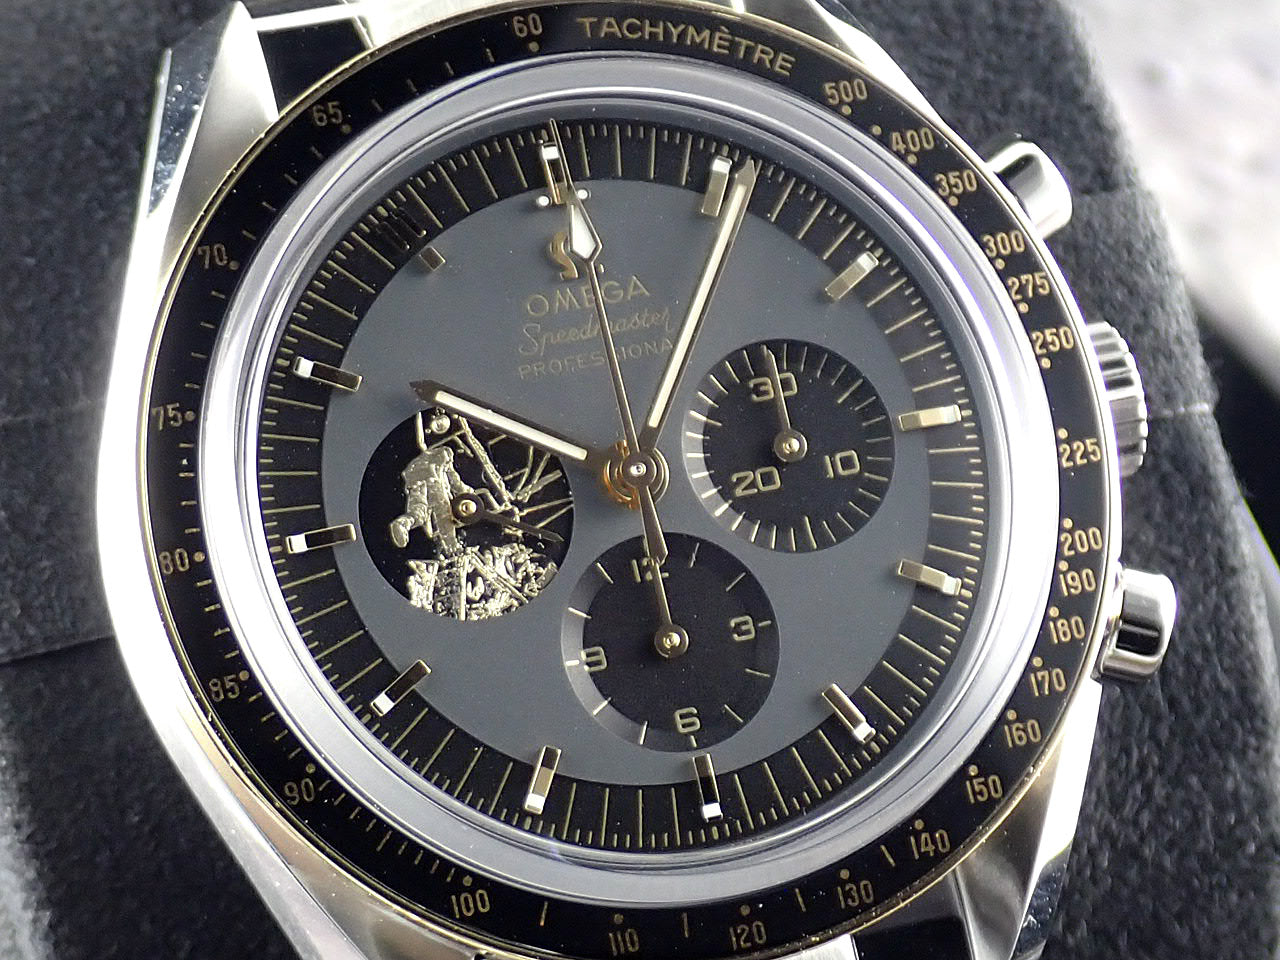 Omega Speedmaster Moonwatch Apollo 11 50th Anniversary Model Limited to 6,969 pieces worldwide &lt;Warranty, box, etc.&gt;